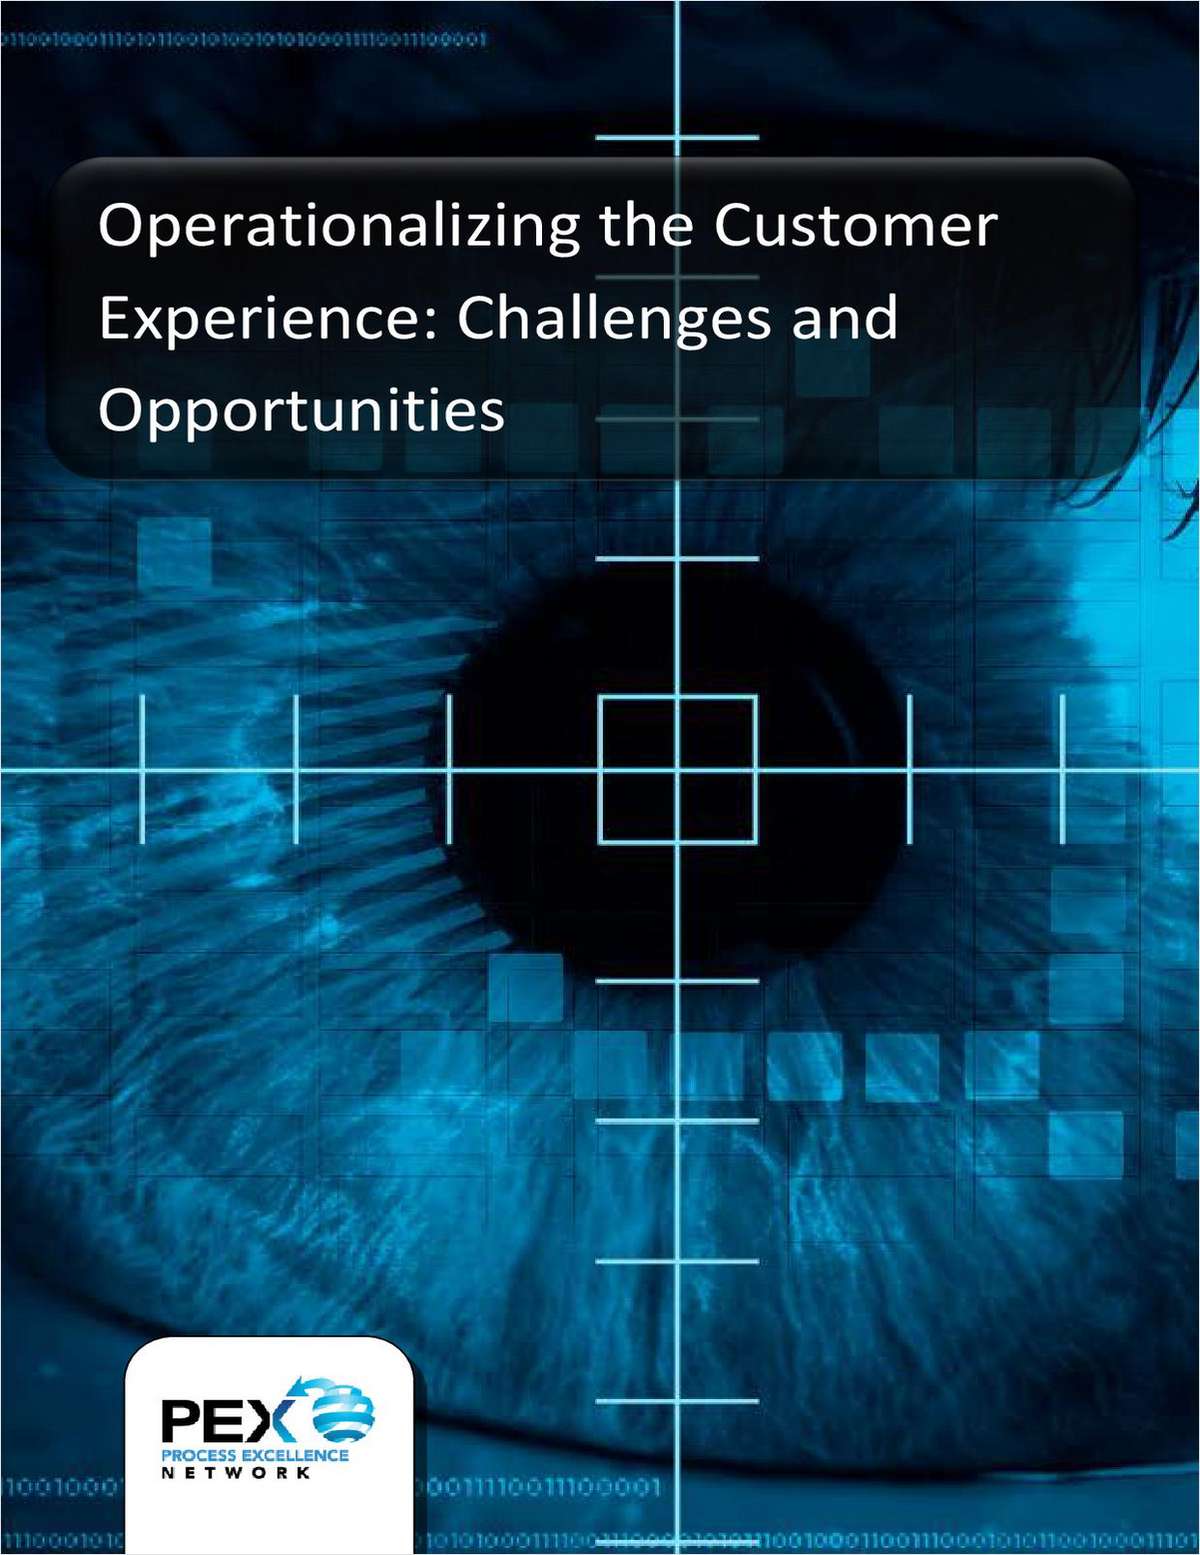 Operationalizing the Customer Experience - Survey Report